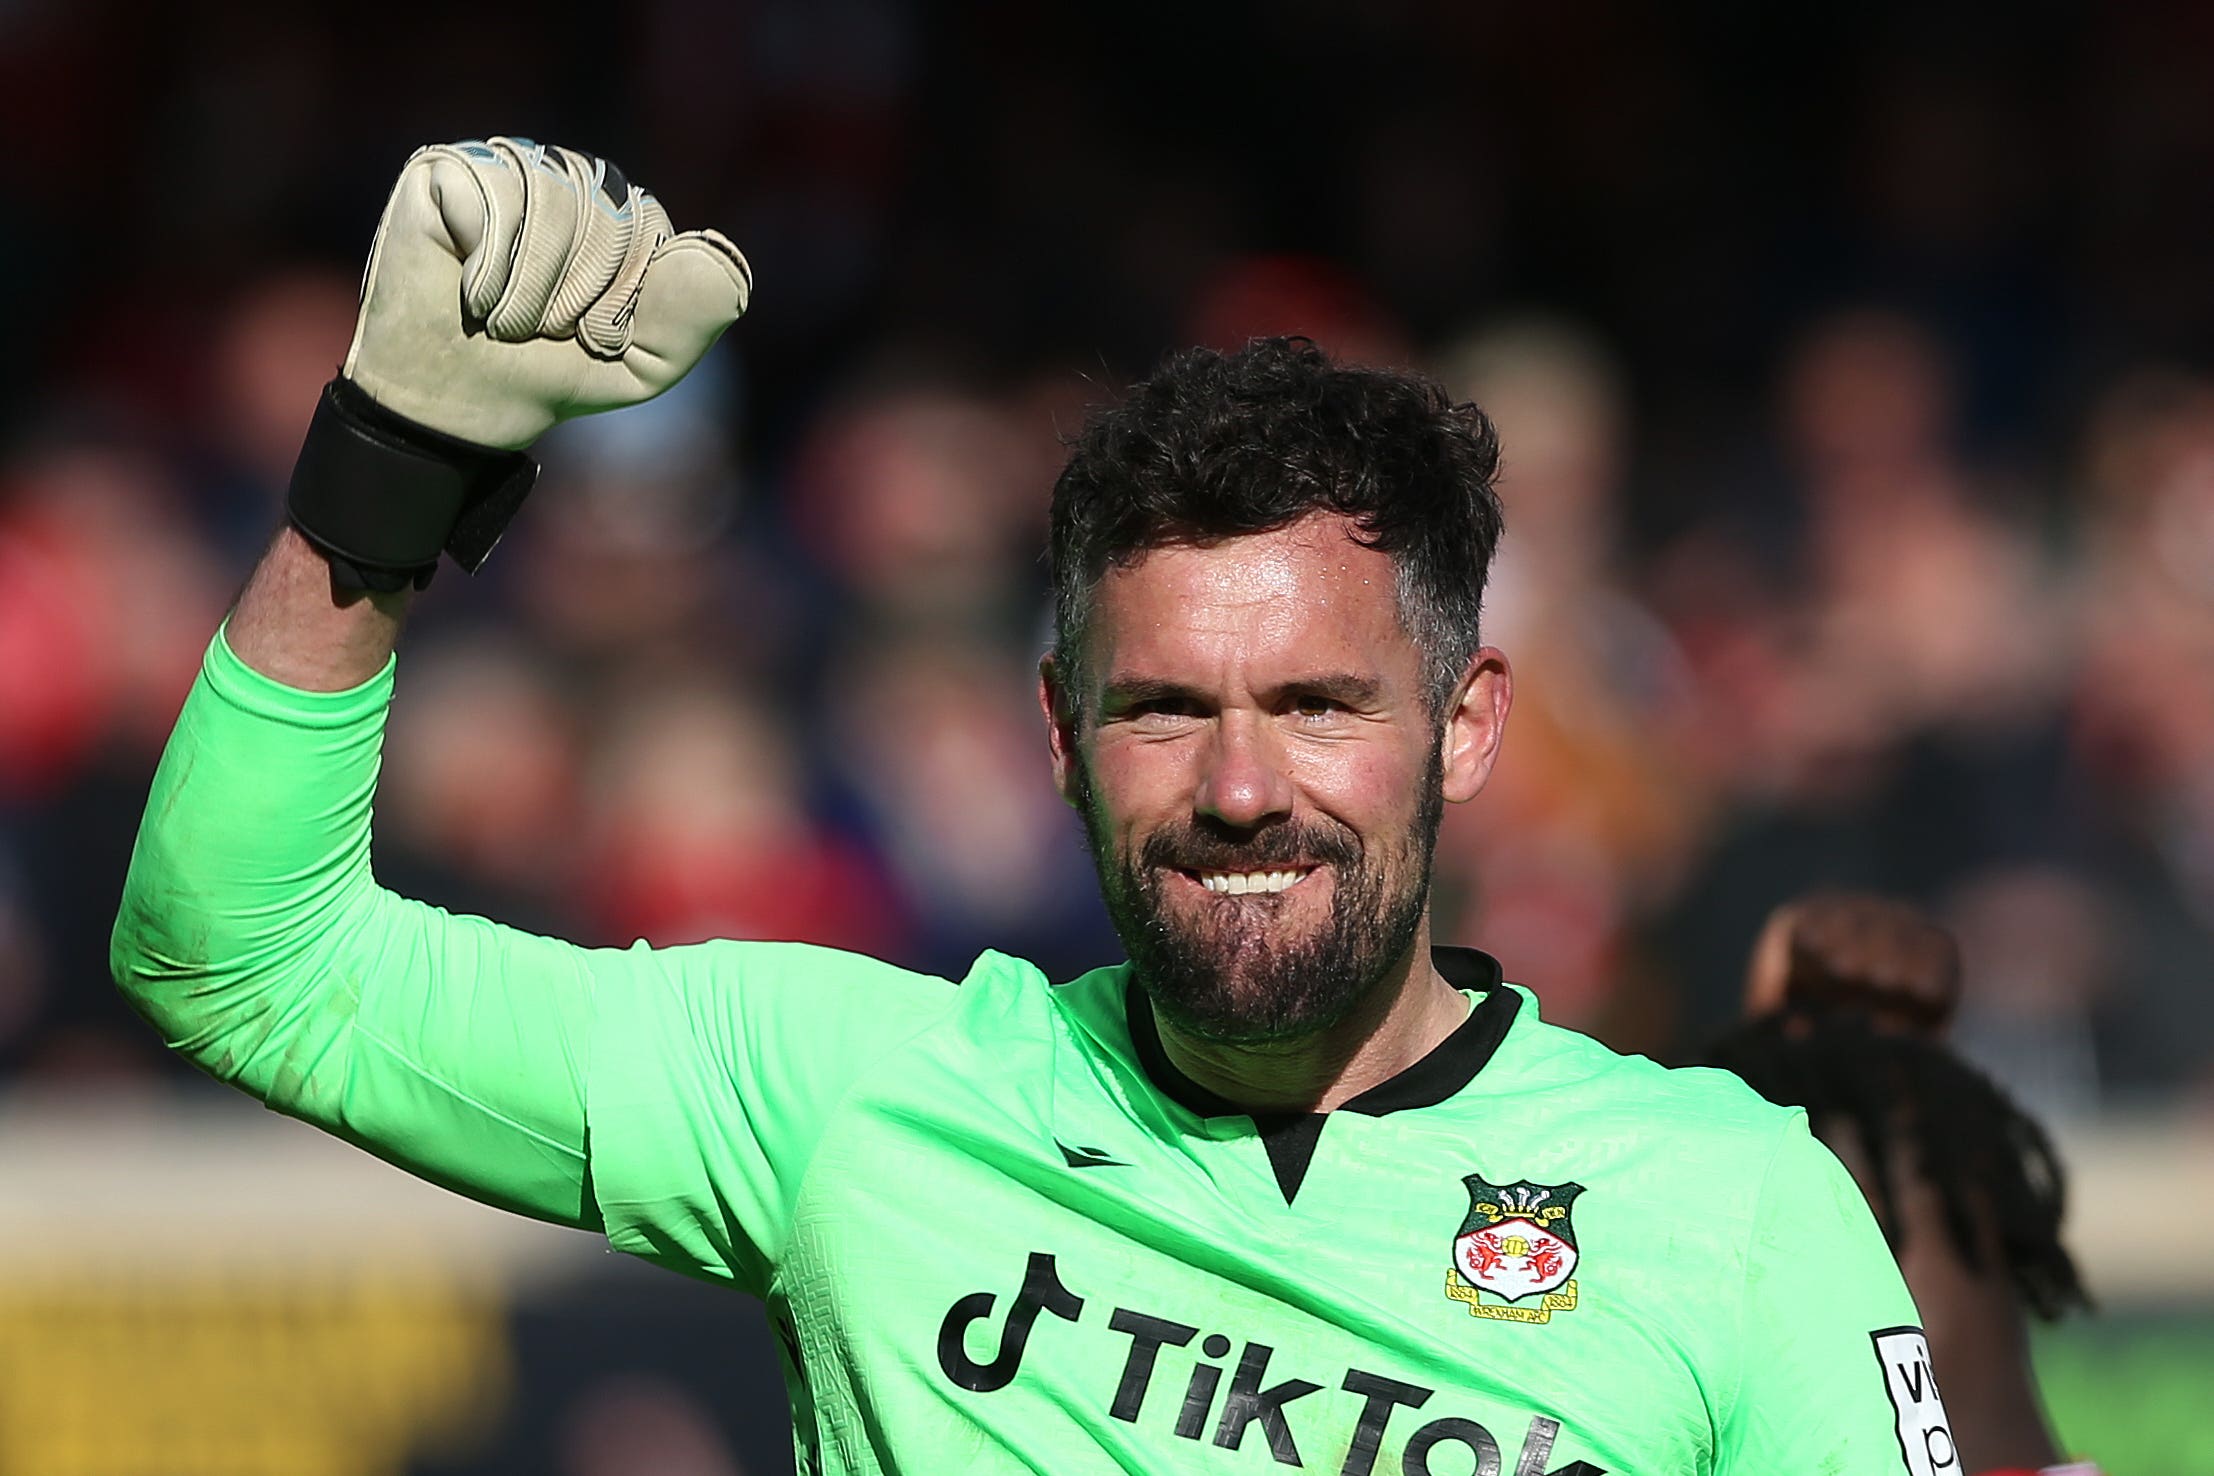 Ben Foster celebrates after Wrexham’s crunch 3-2 Easter Monday victory over Notts County (Barrington Combs/PA)